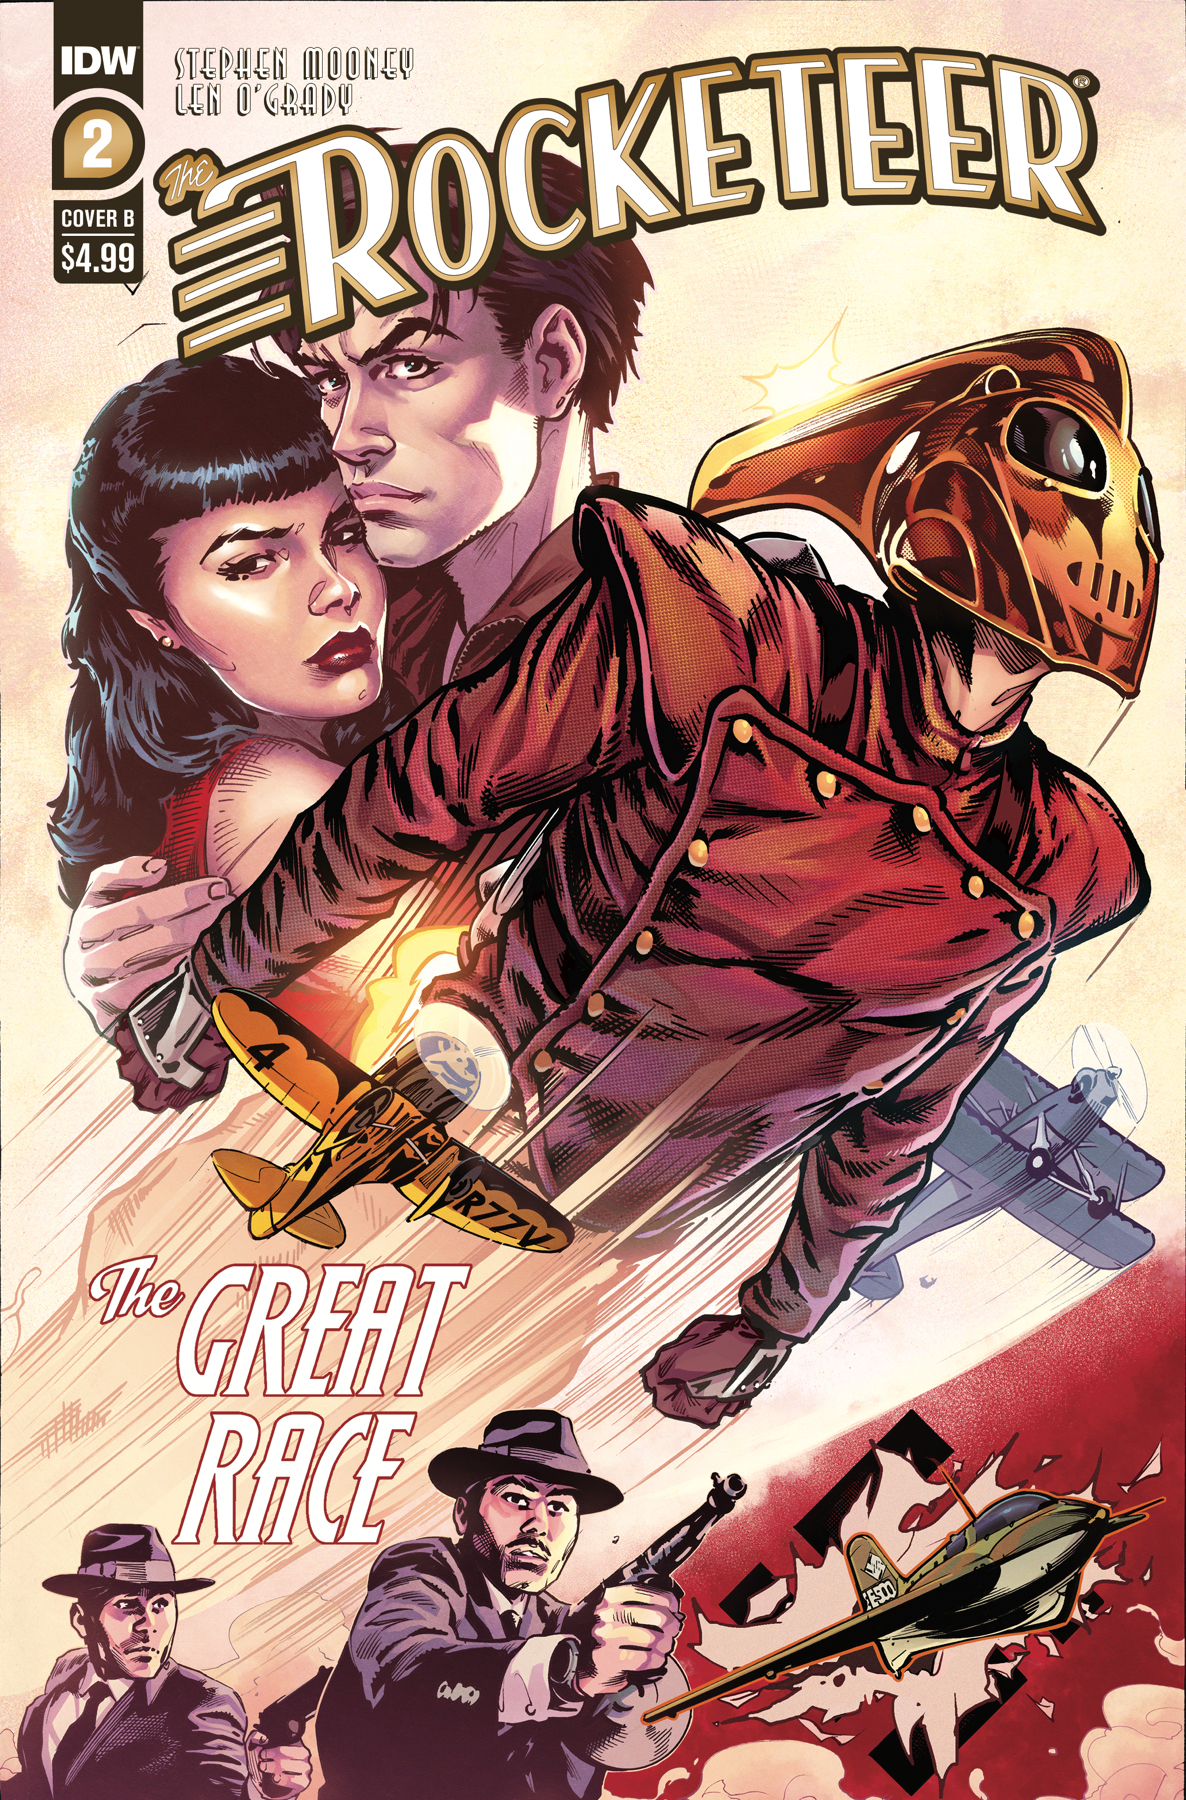 Rocketeer The Great Race #2 Cover B Stephen Mooney (Of 4)